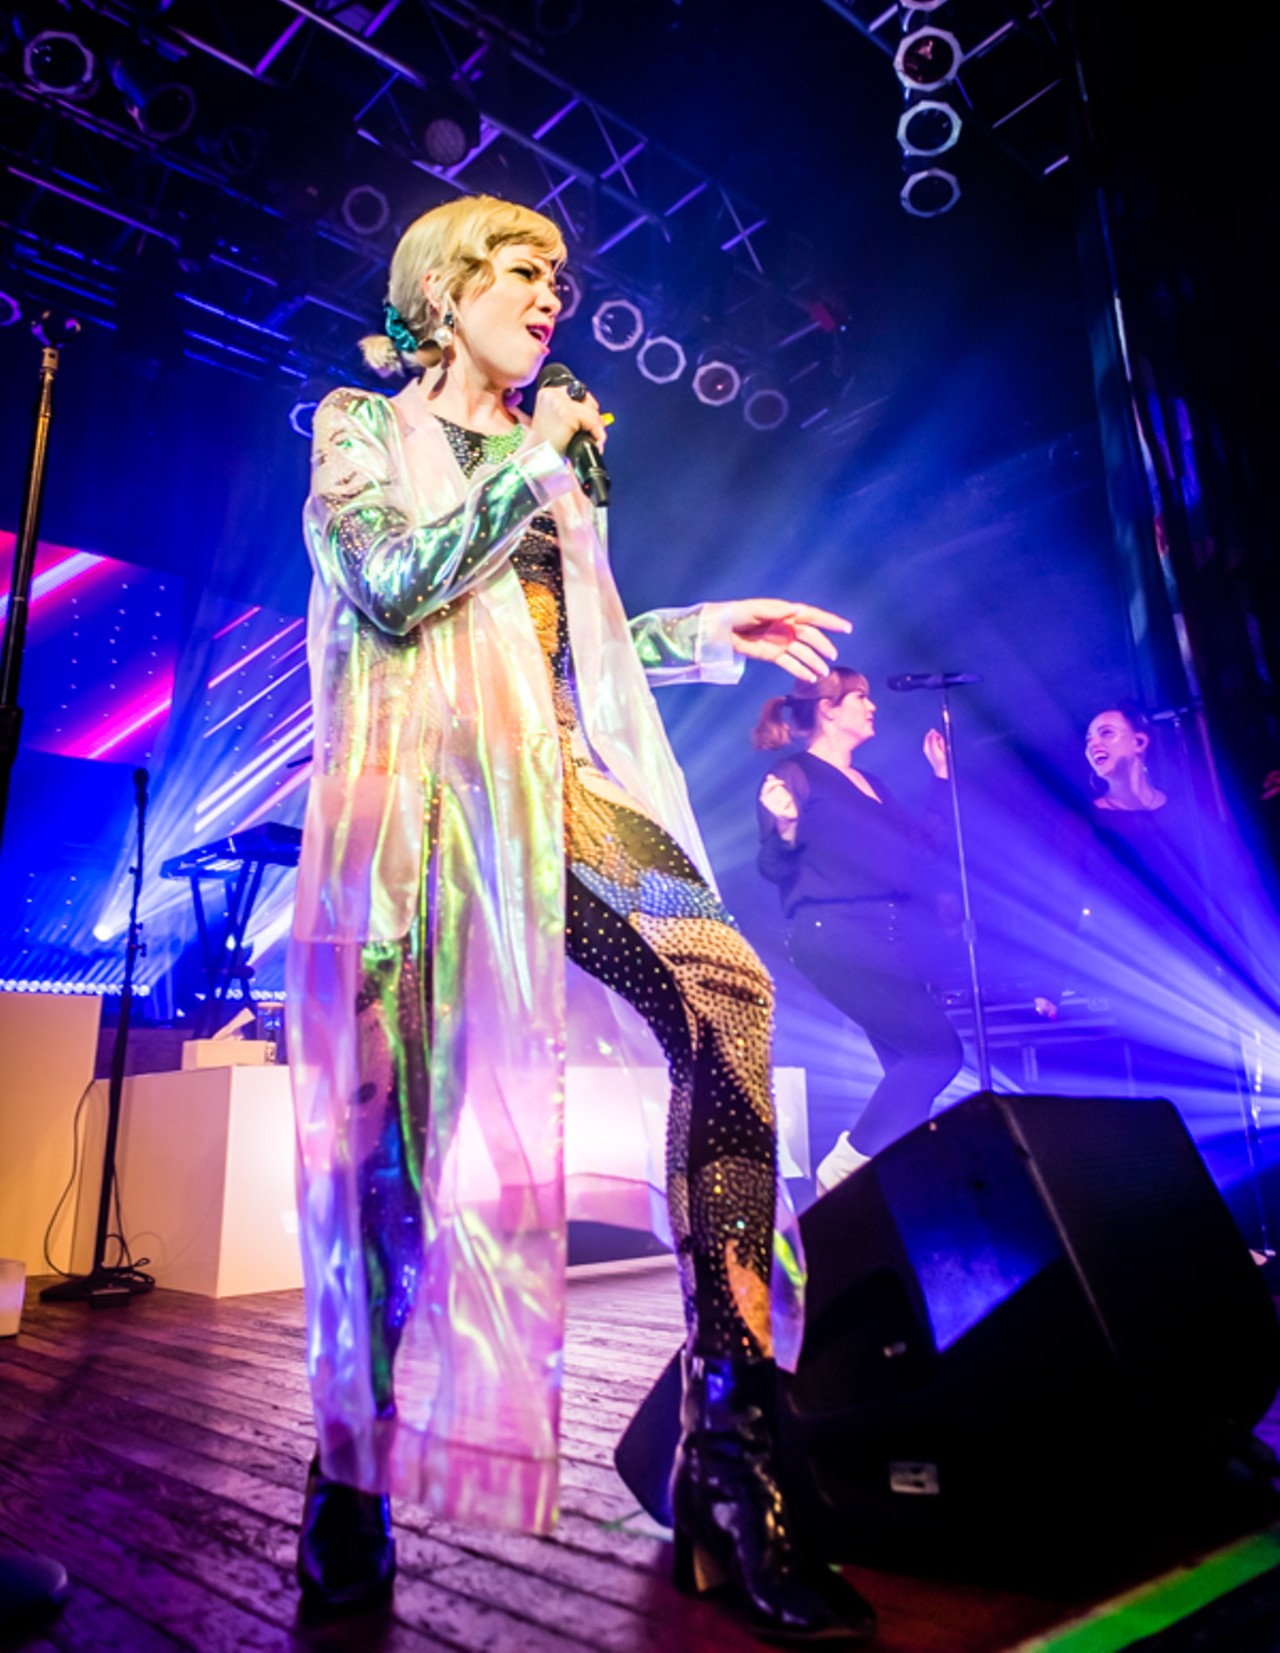 Photos From Carly Rae Jepsen's Concert at House of Blues